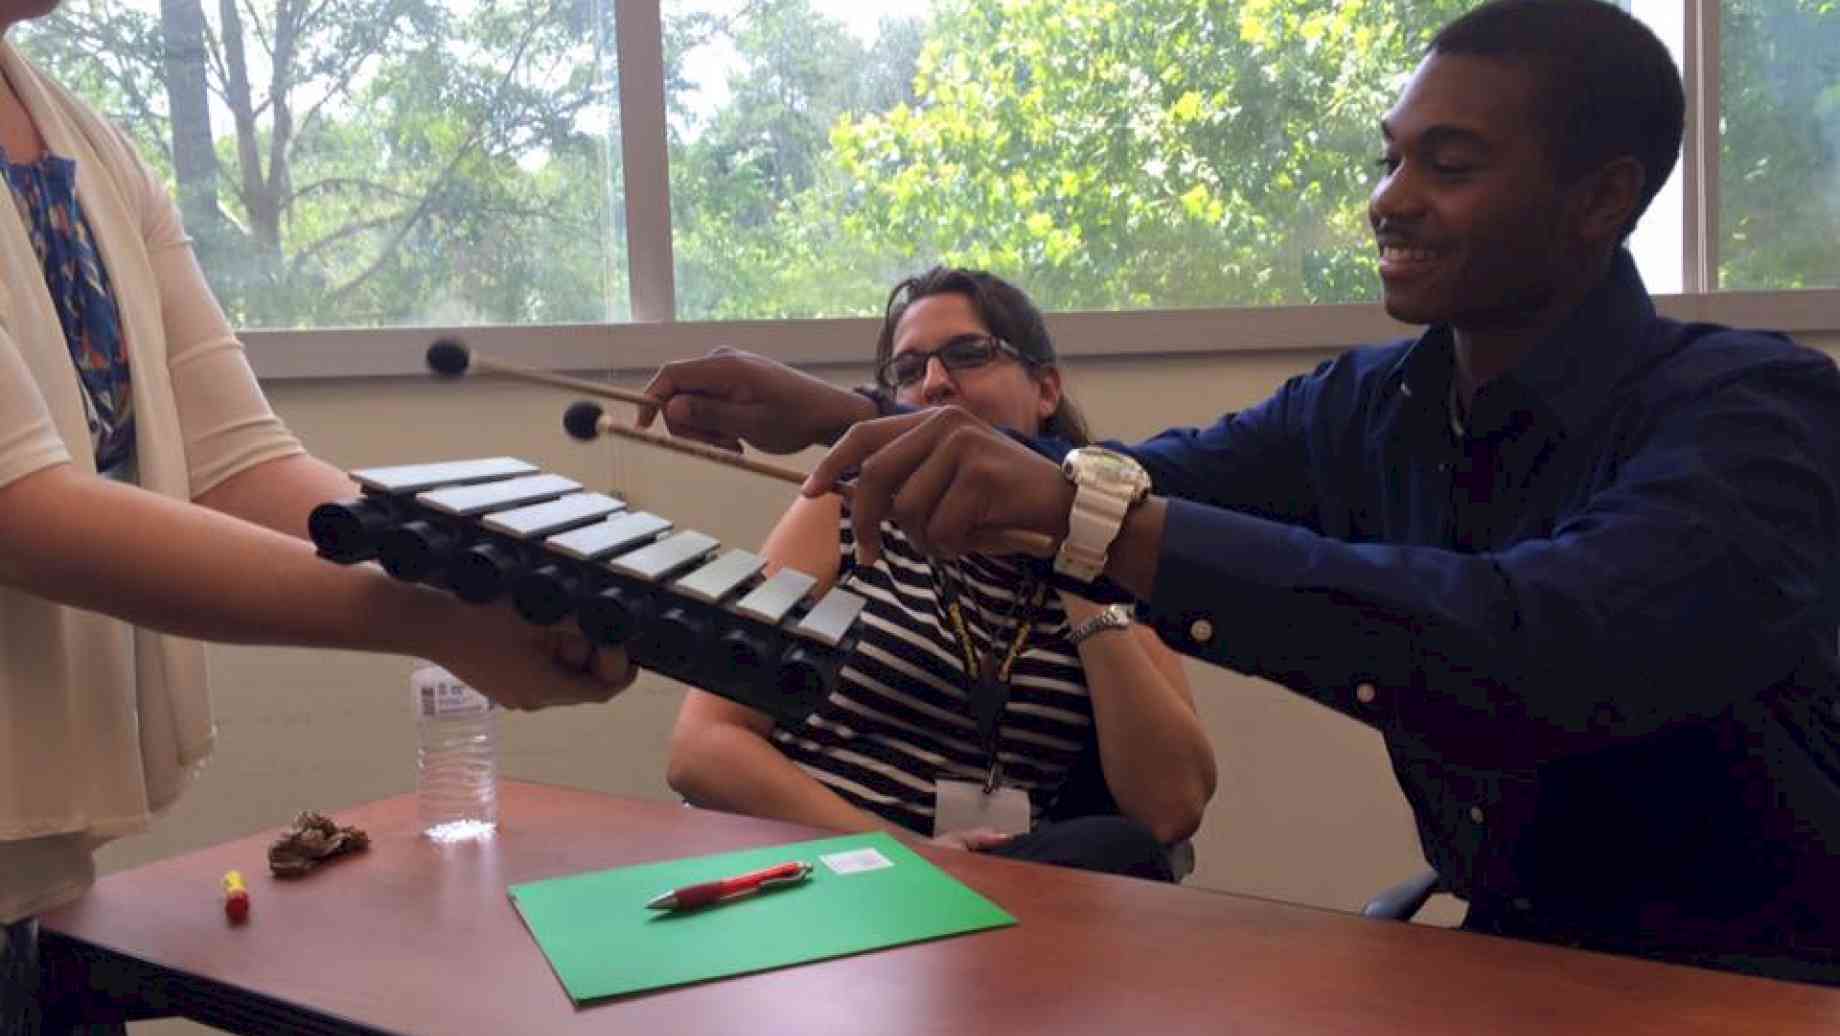 A musician-in-residence demonstrates simple instruments that they use in the hospital for bedside visits.